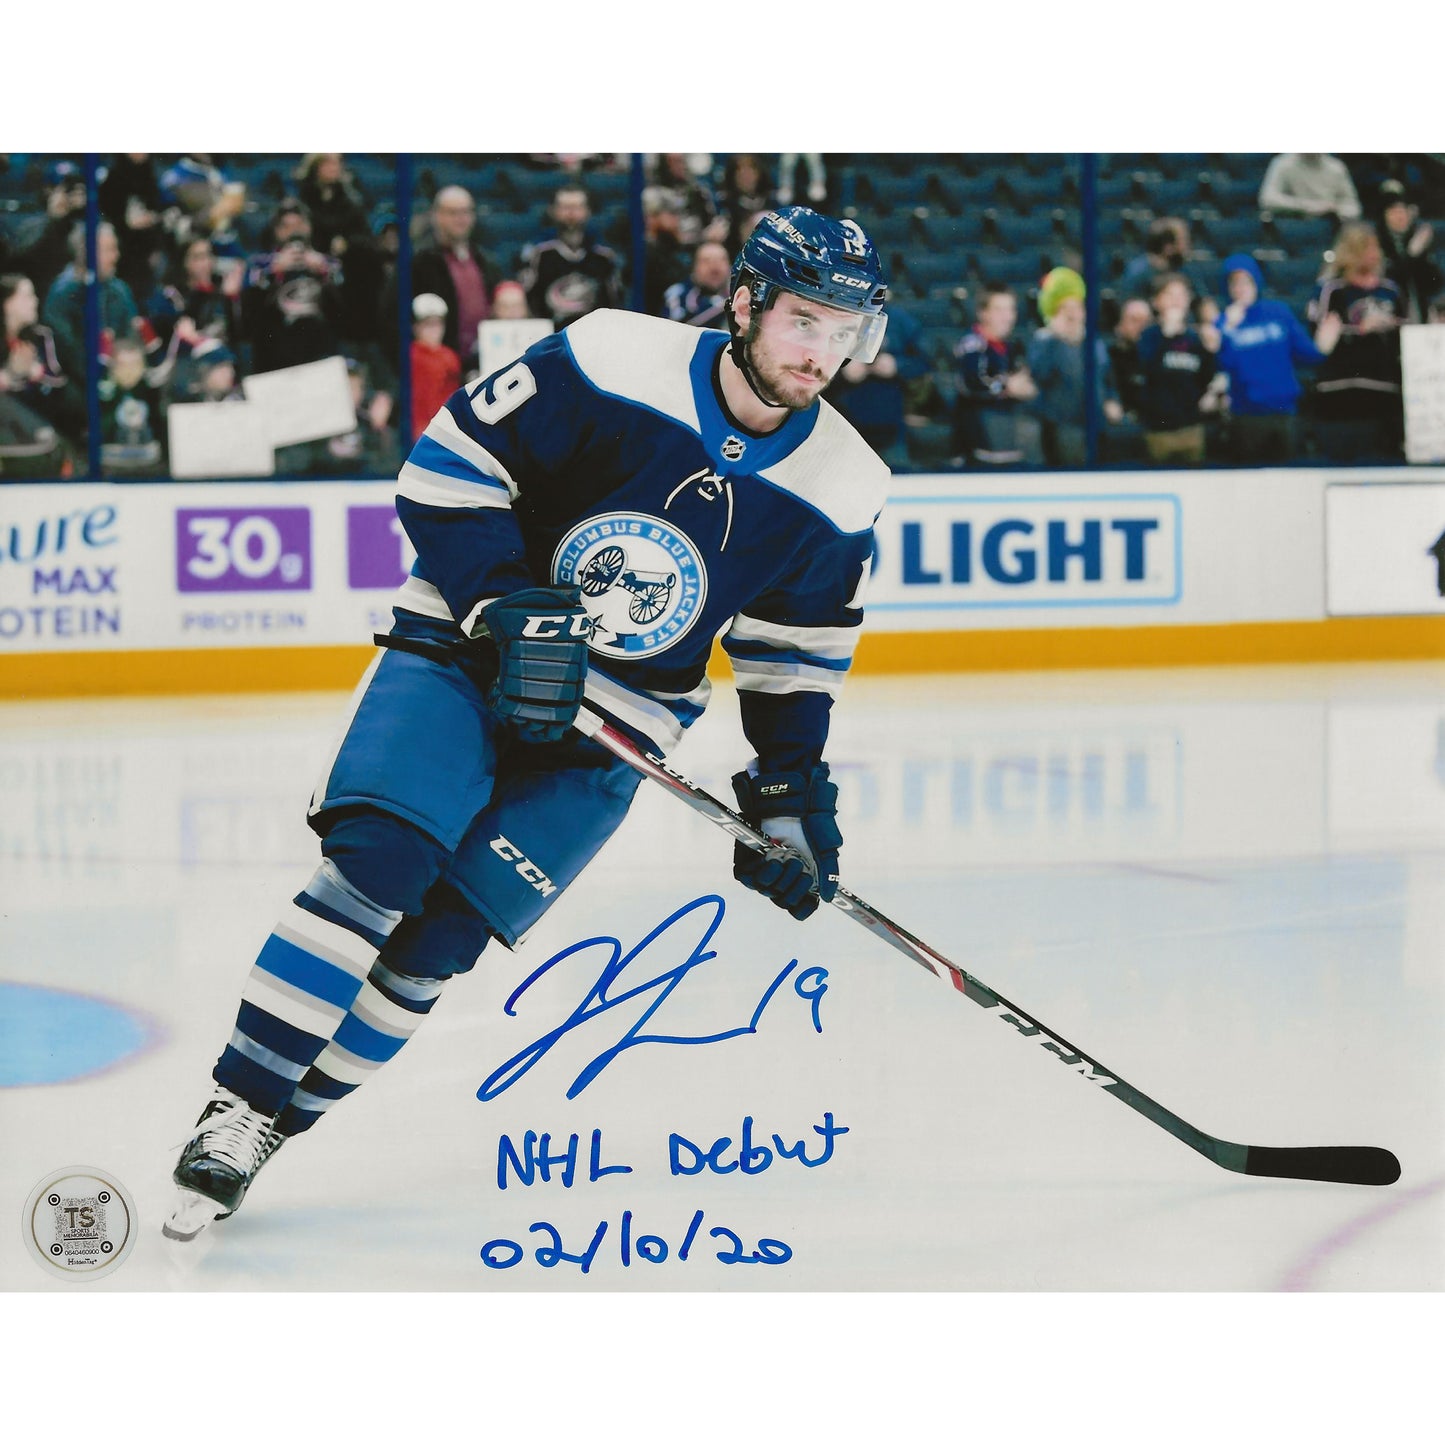 Liam Foudy Autographed Columbus Blue Jackets Warm-Up 8x10 Photo Inscribed "NHL Debut 02/10/20"